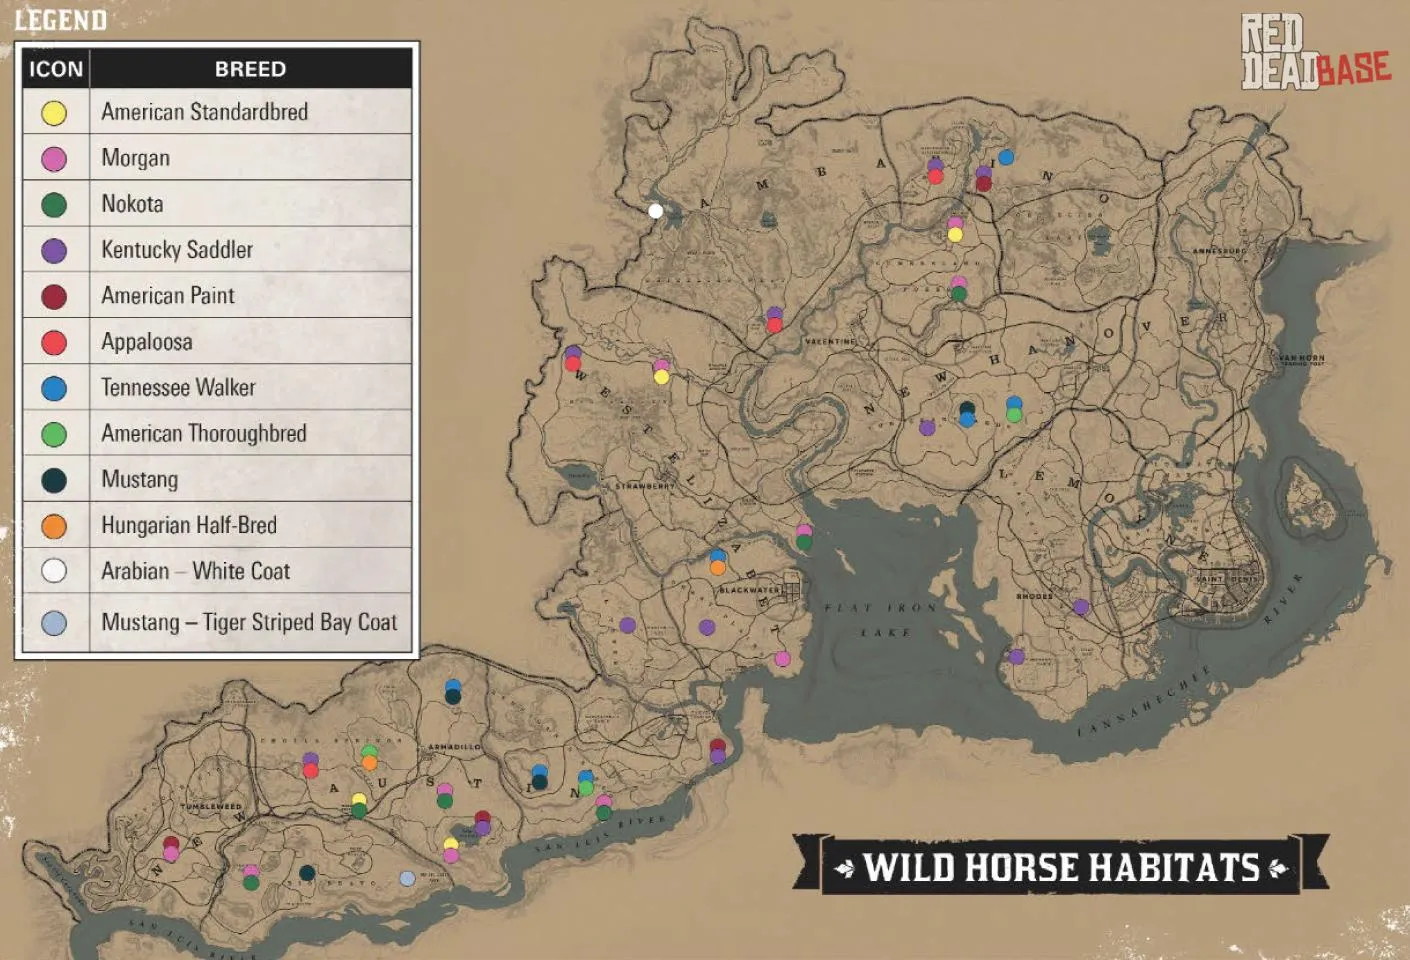 American Standardbred - Map Location in RDR2